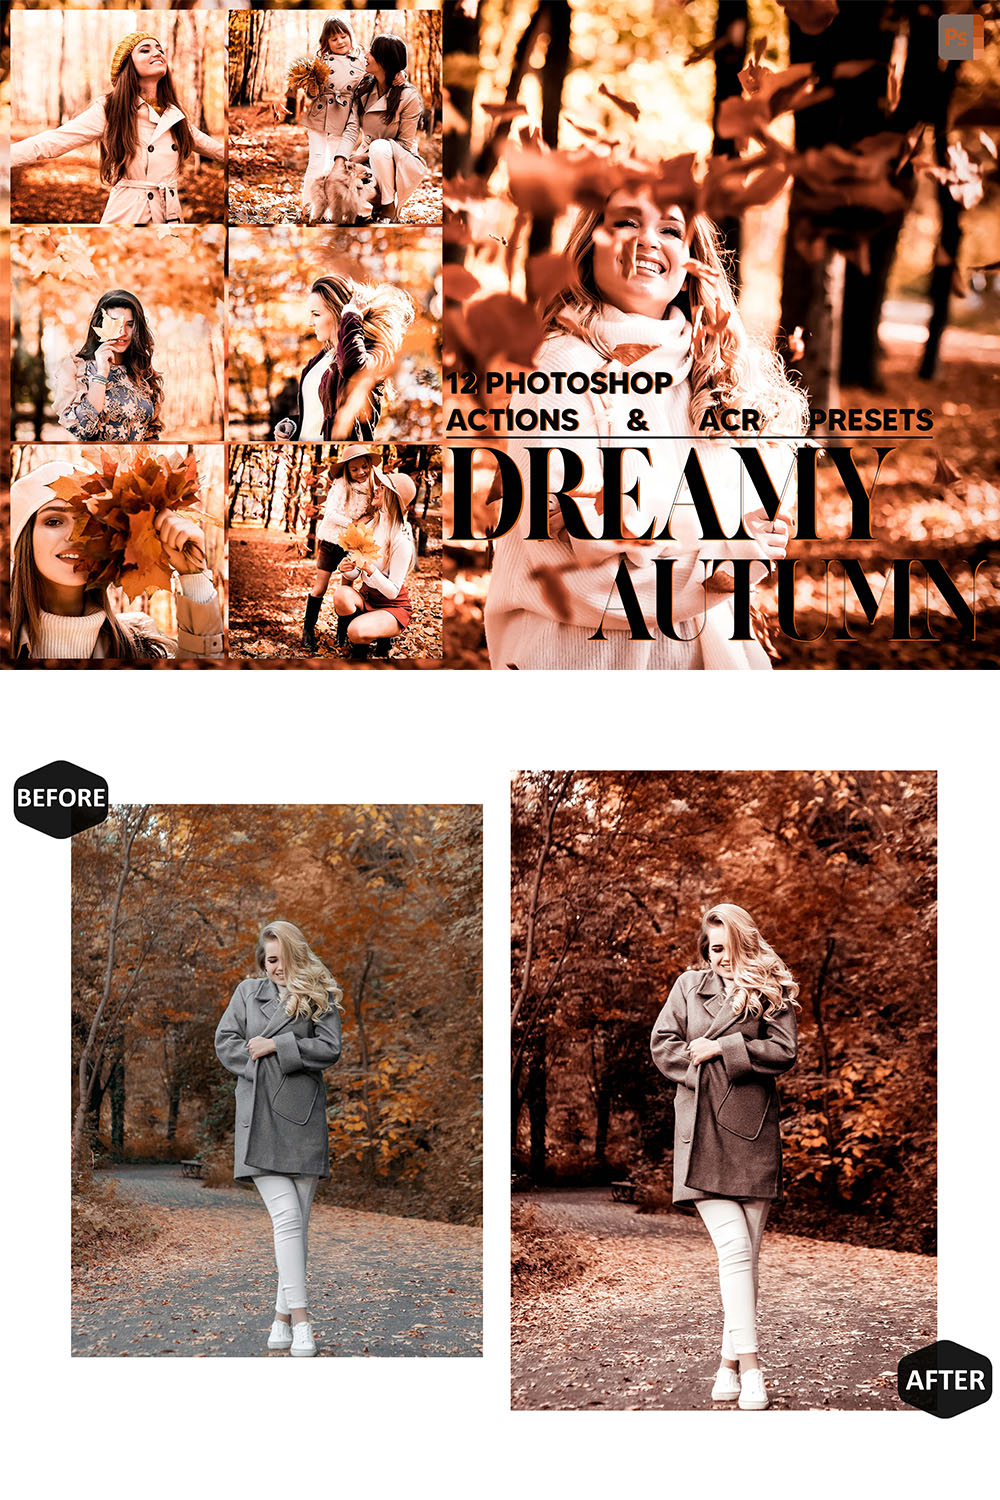 12 Photoshop Actions, Dreamy Autumn Ps Action, Orange ACR Preset, Glamour Ps Filter, Atn Portrait And Lifestyle Theme For Instagram, Blogger pinterest preview image.